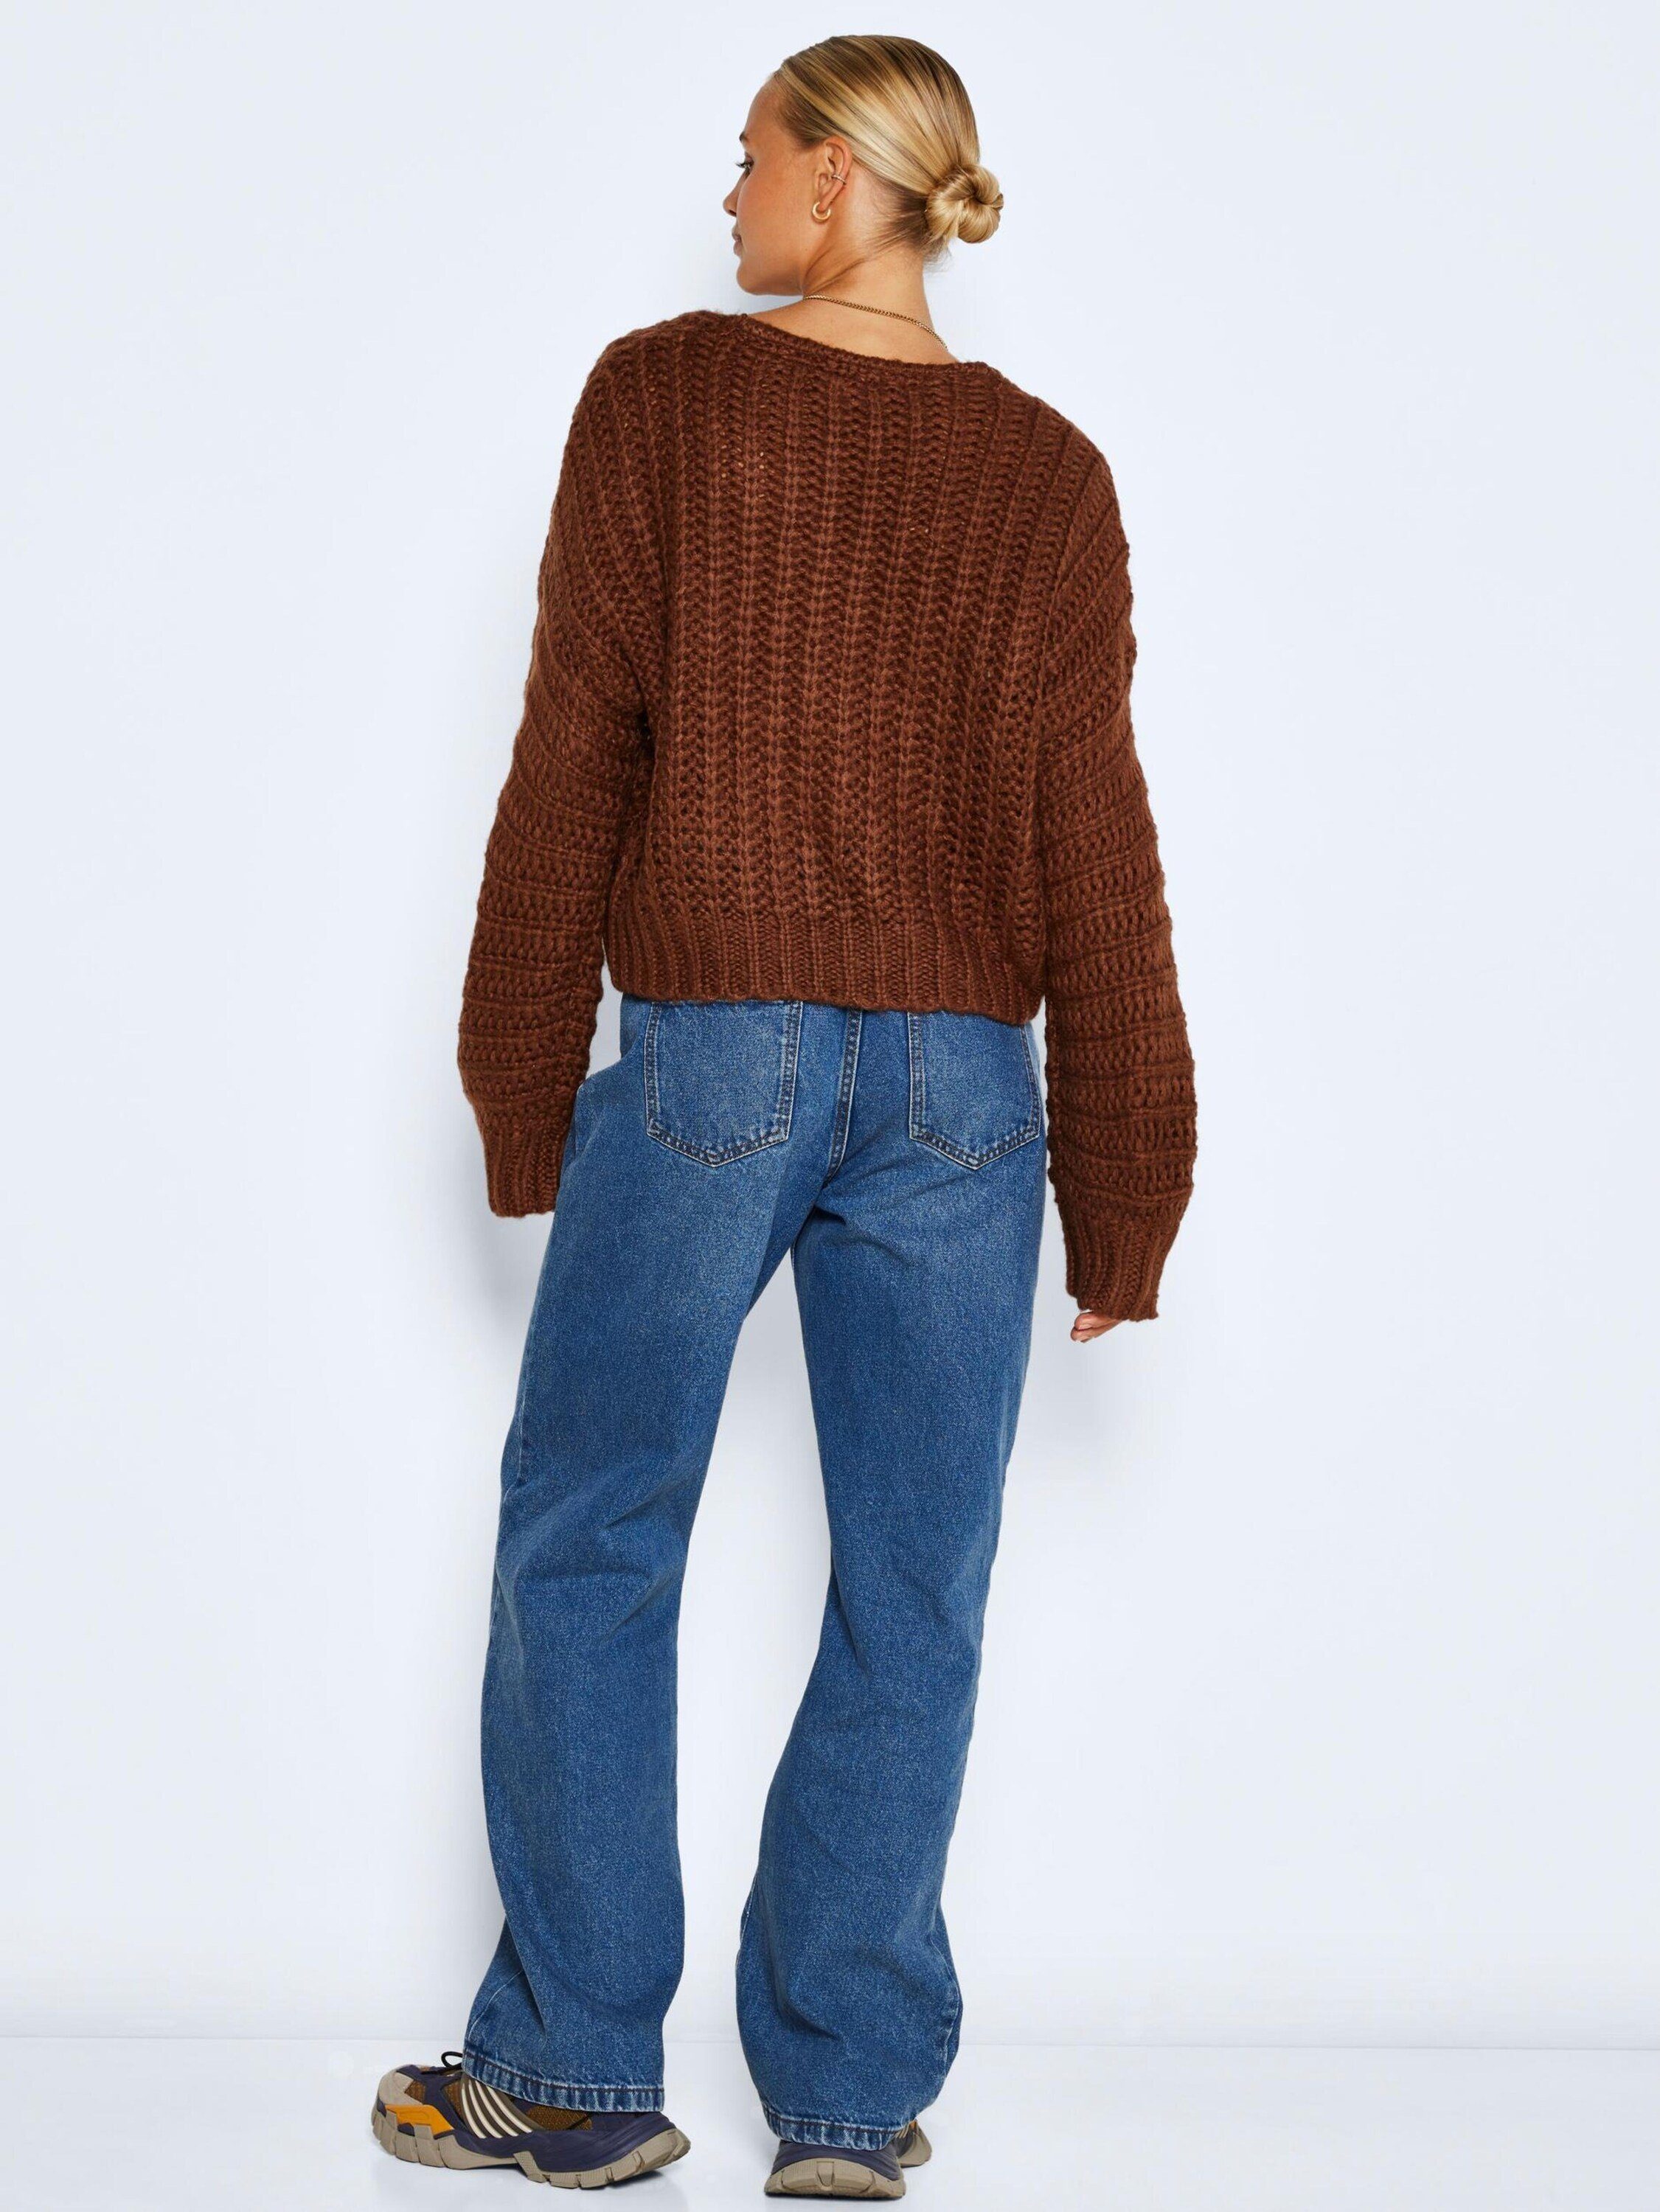 Steve Noisy may (1-tlg) Strickpullover Plain/ohne Details Cappuccino 27020930